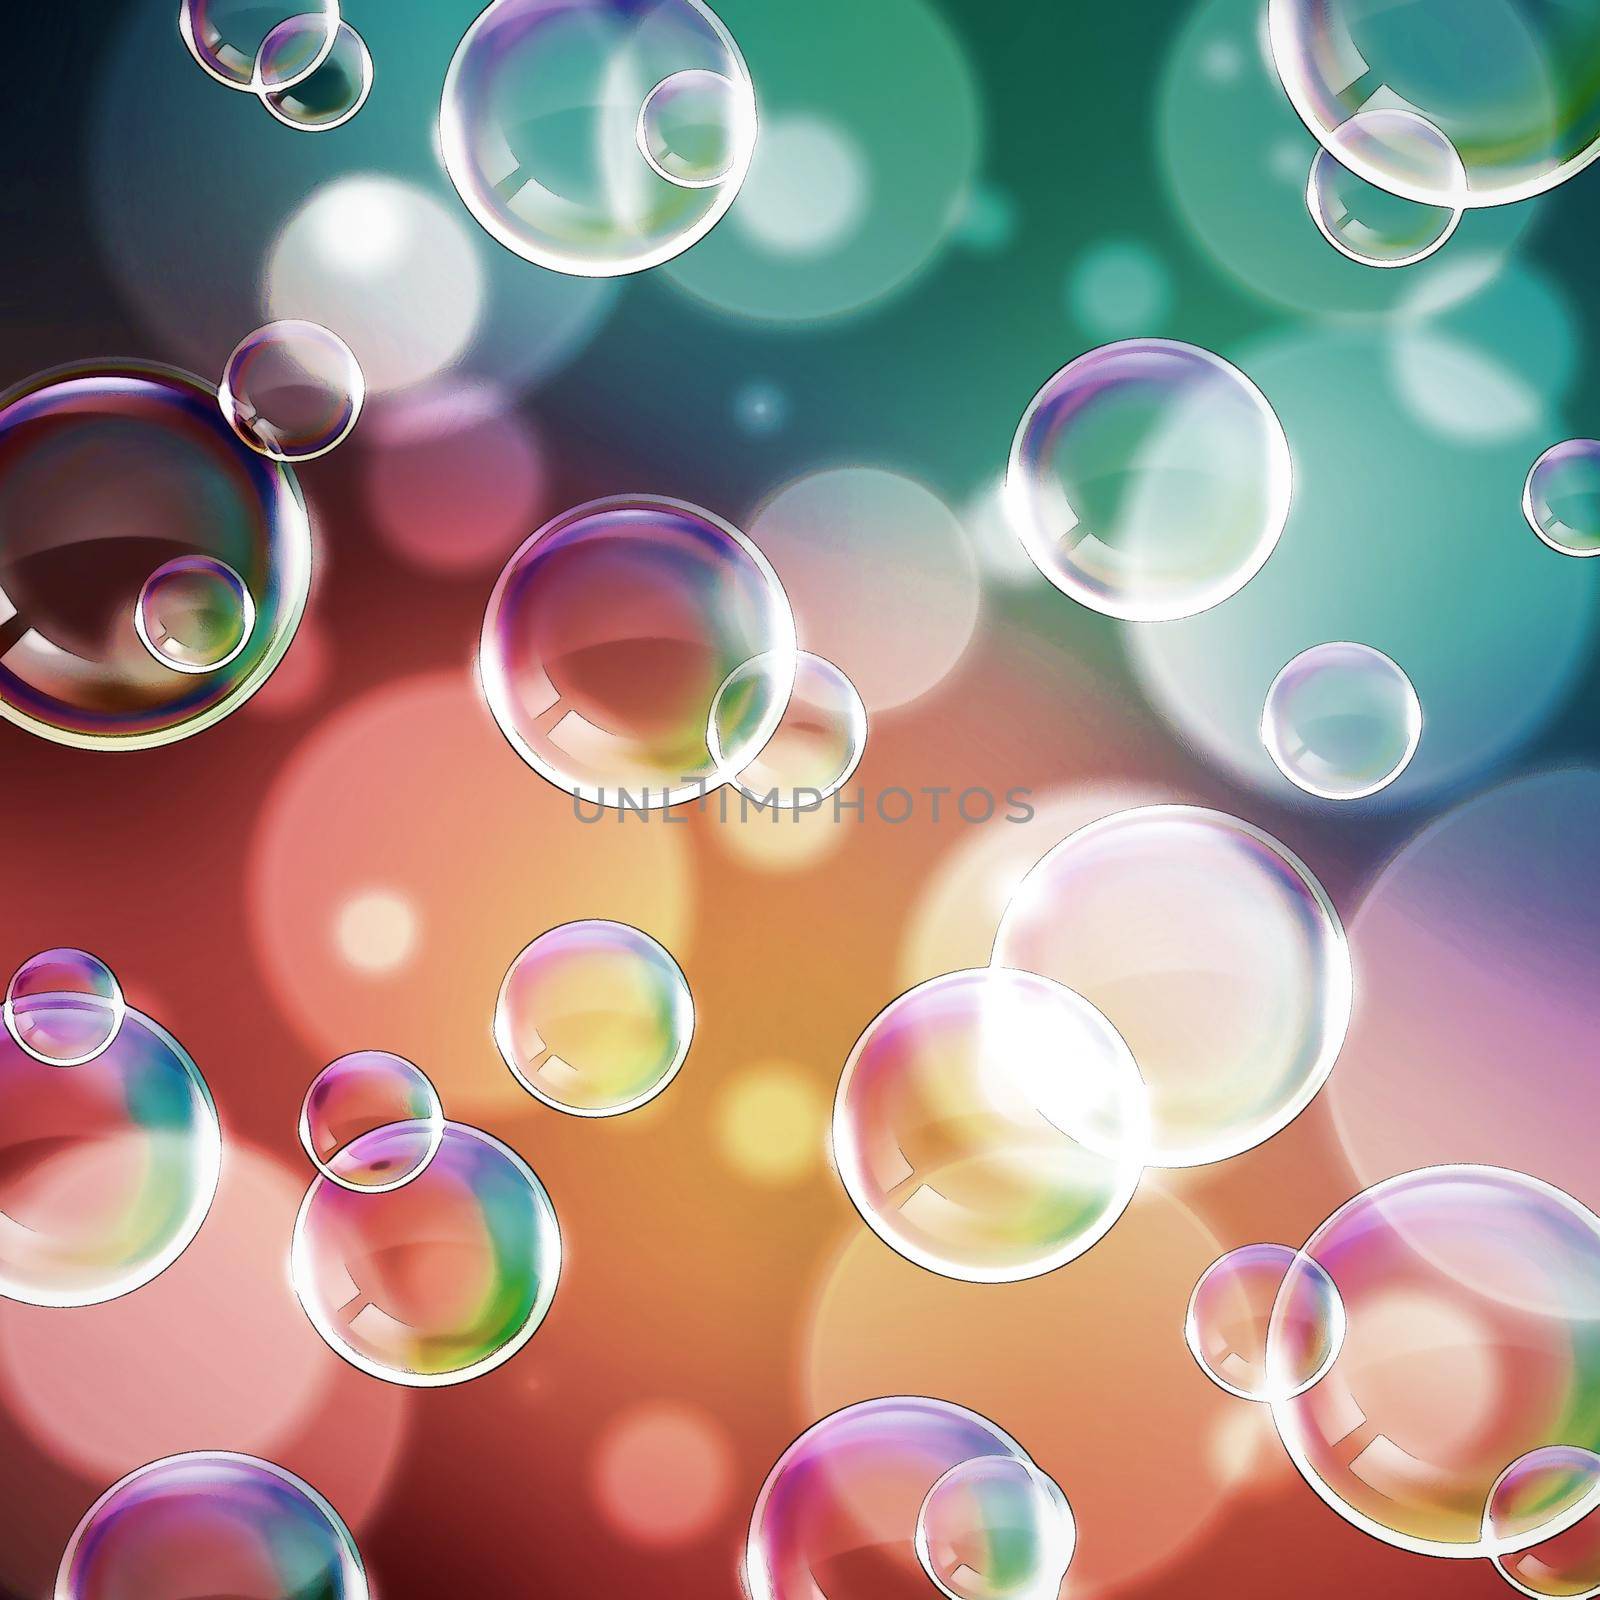 Abstract background image: beautiful colorful glowing rainbow bubbles of different size.